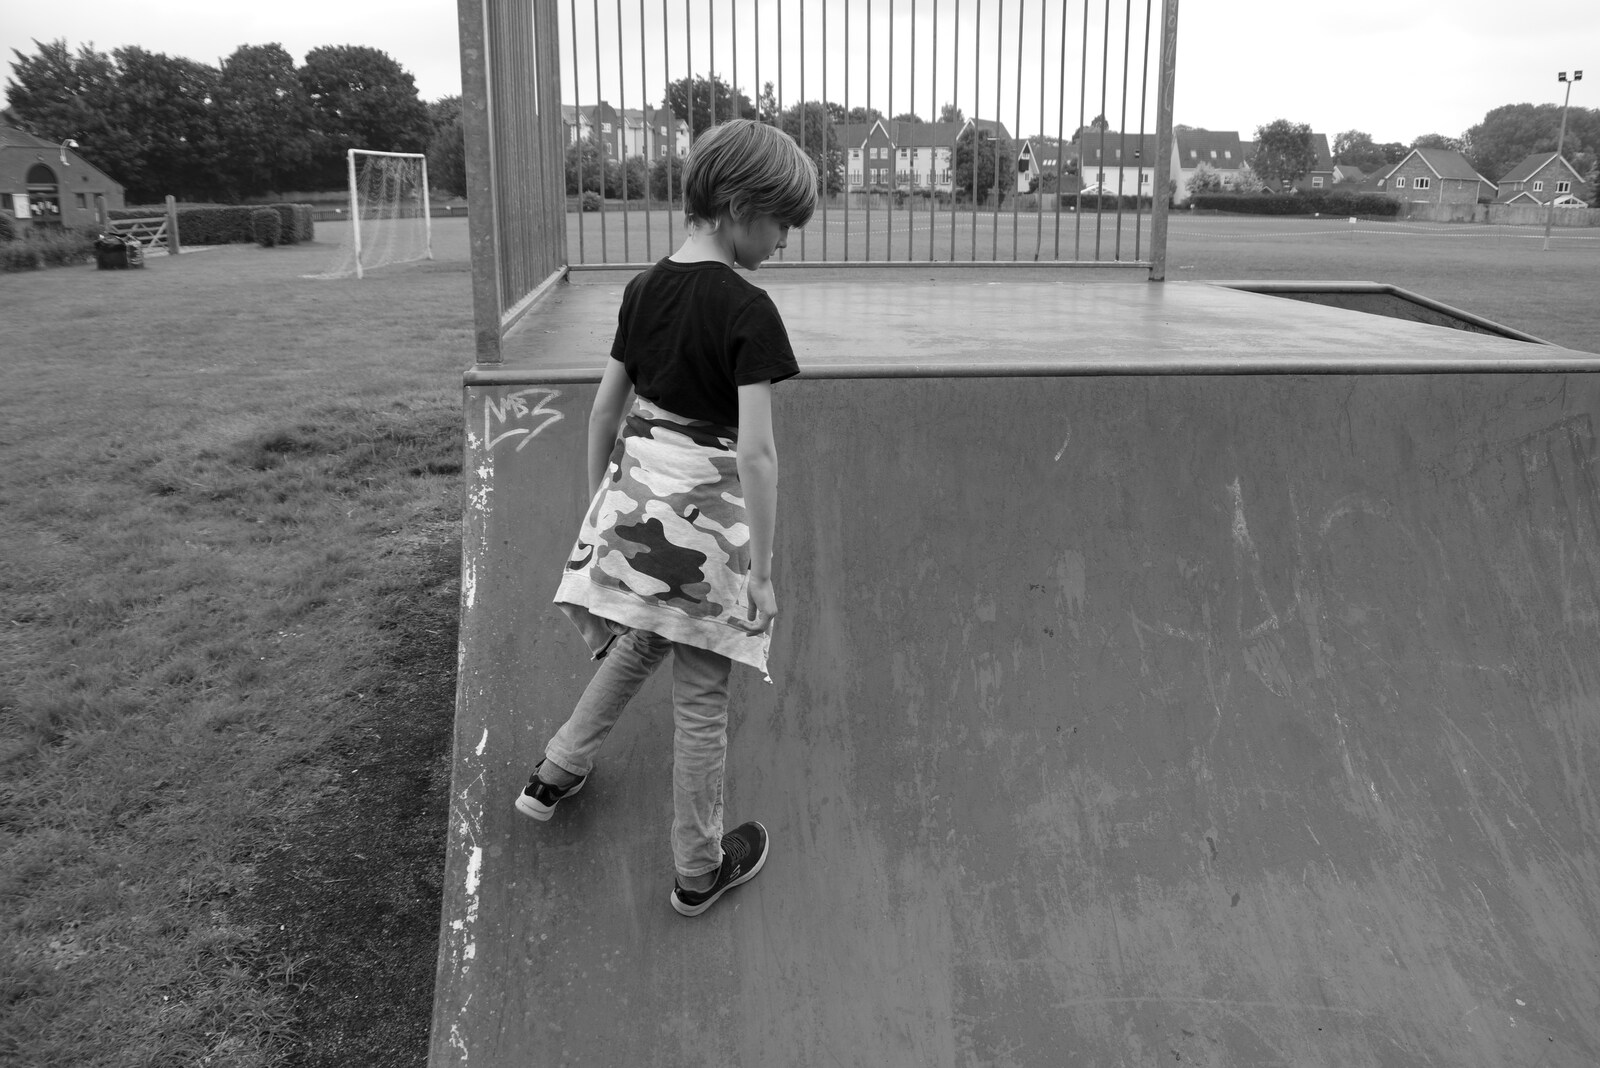 Harry stands on a ramp slope from New Kittens, and The Skate Park, Town Moors, Eye, Suffolk - 3rd July 2021